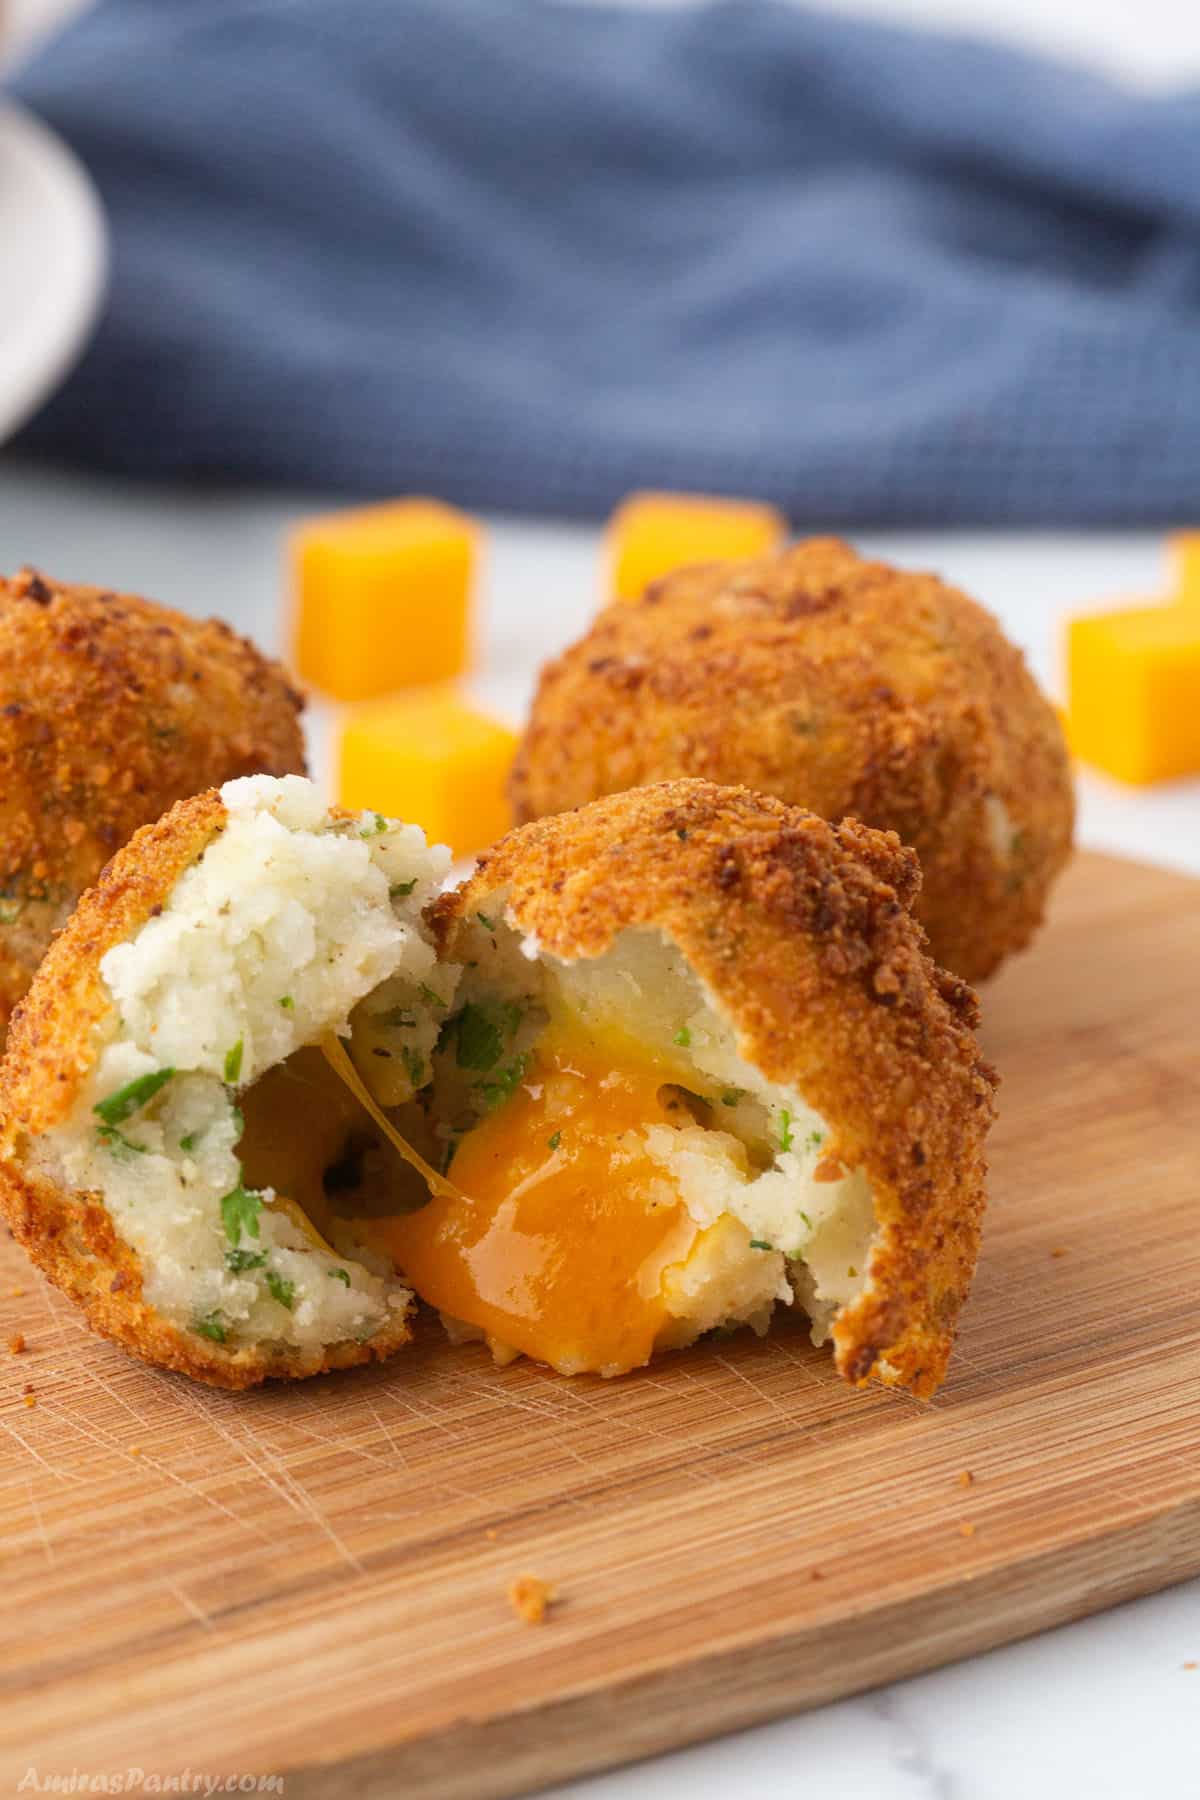 Potato balls on a wodden board with one open showing oozing cheese.